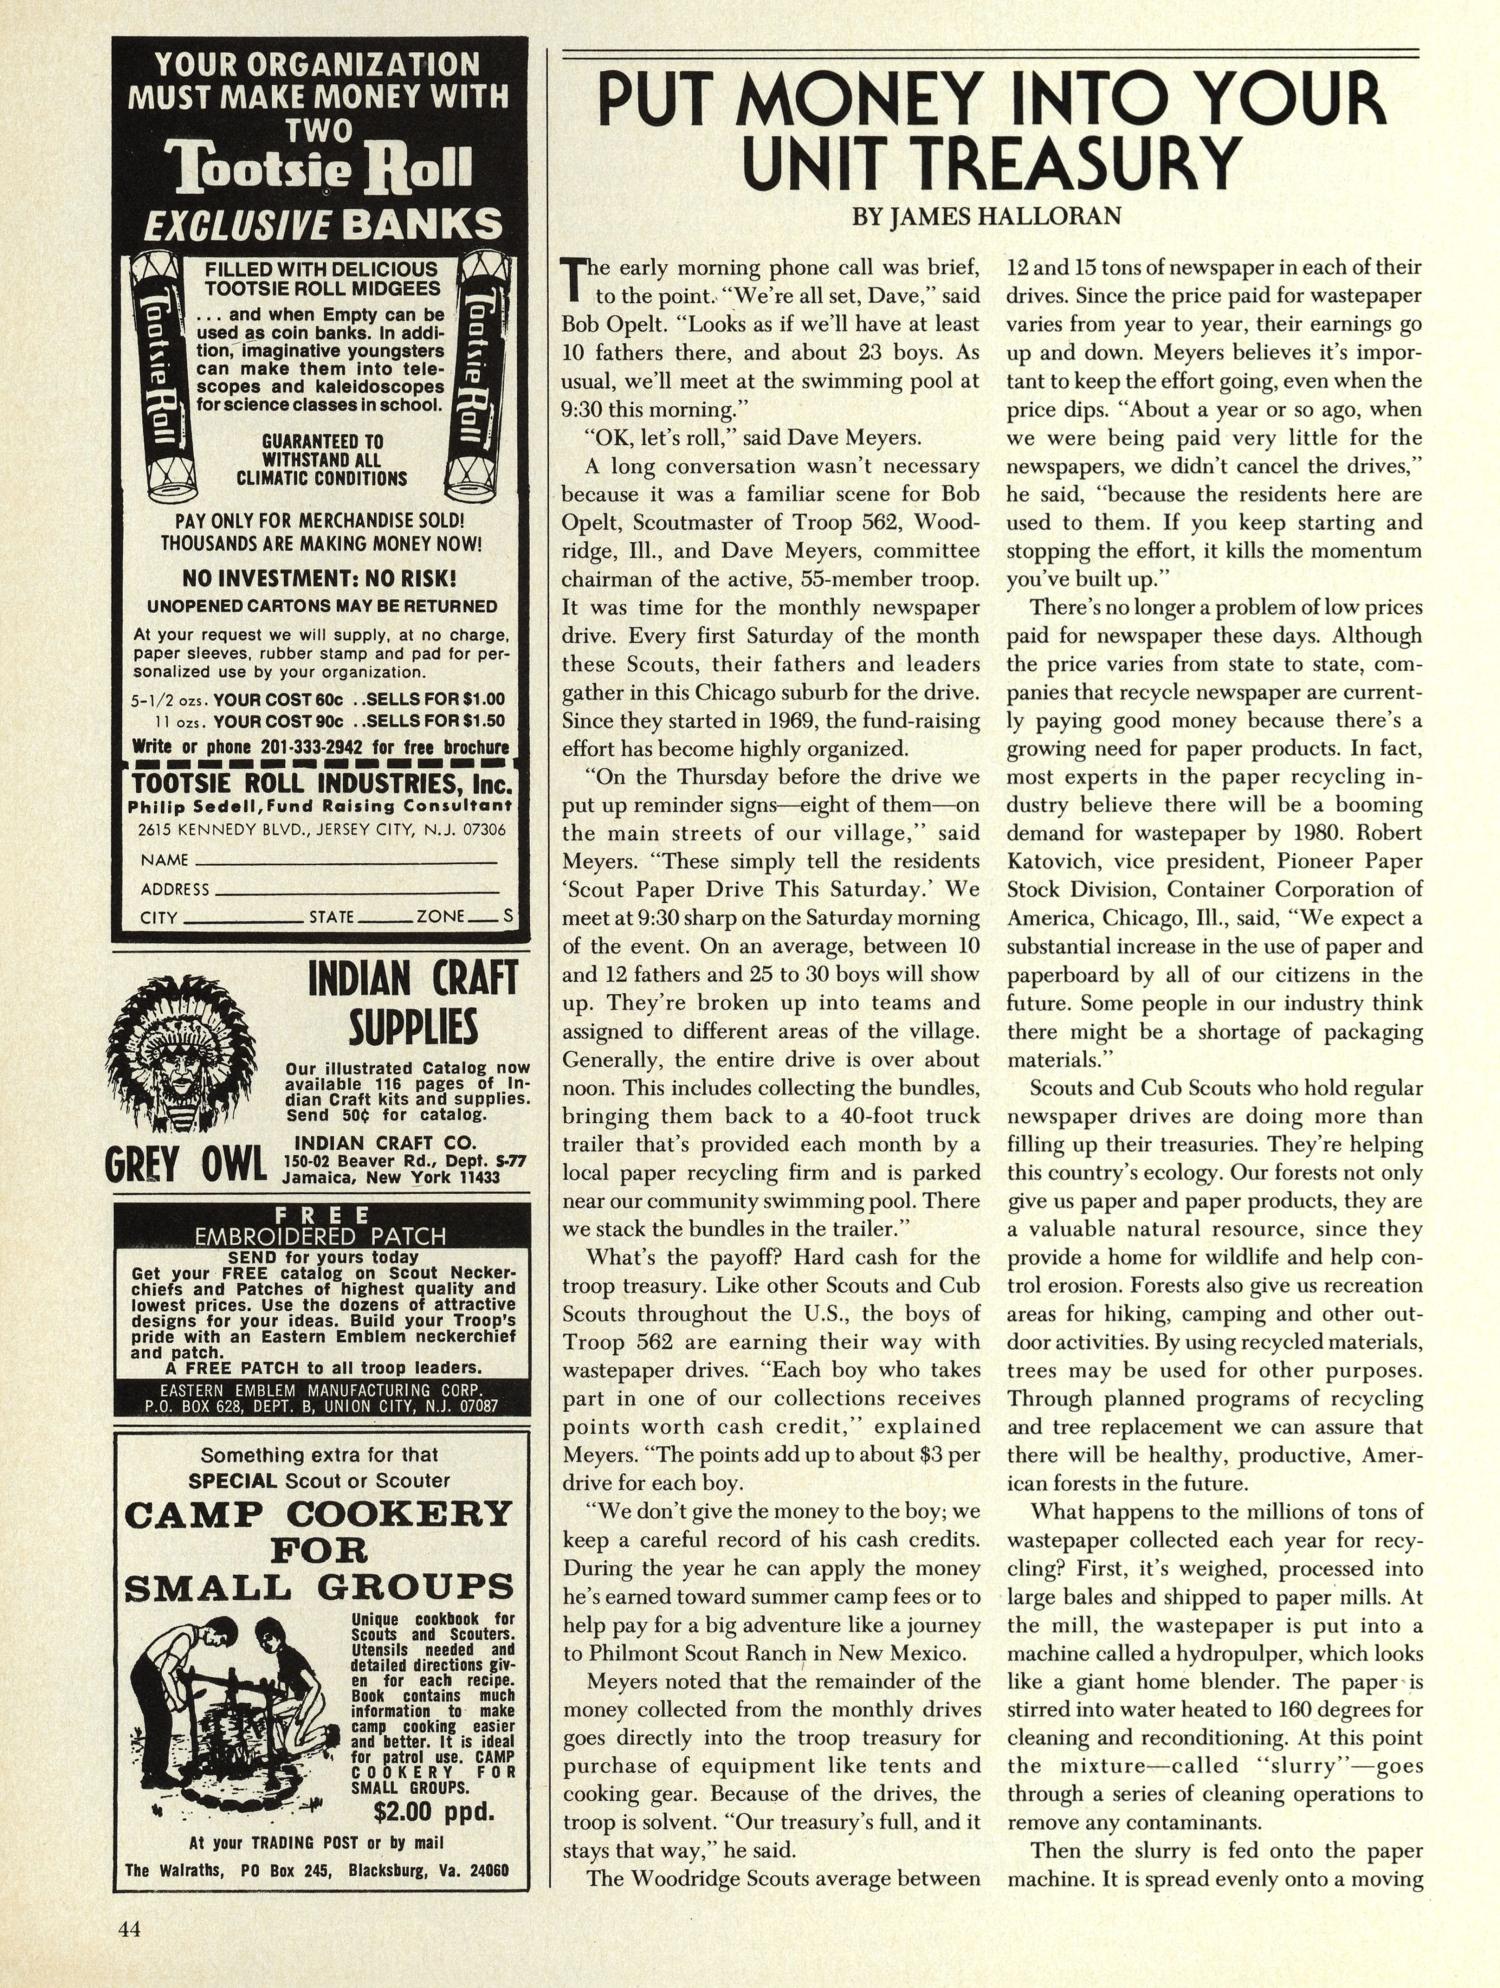 Scouting, Volume 65, Number 3, May-June 1977
                                                
                                                    44
                                                